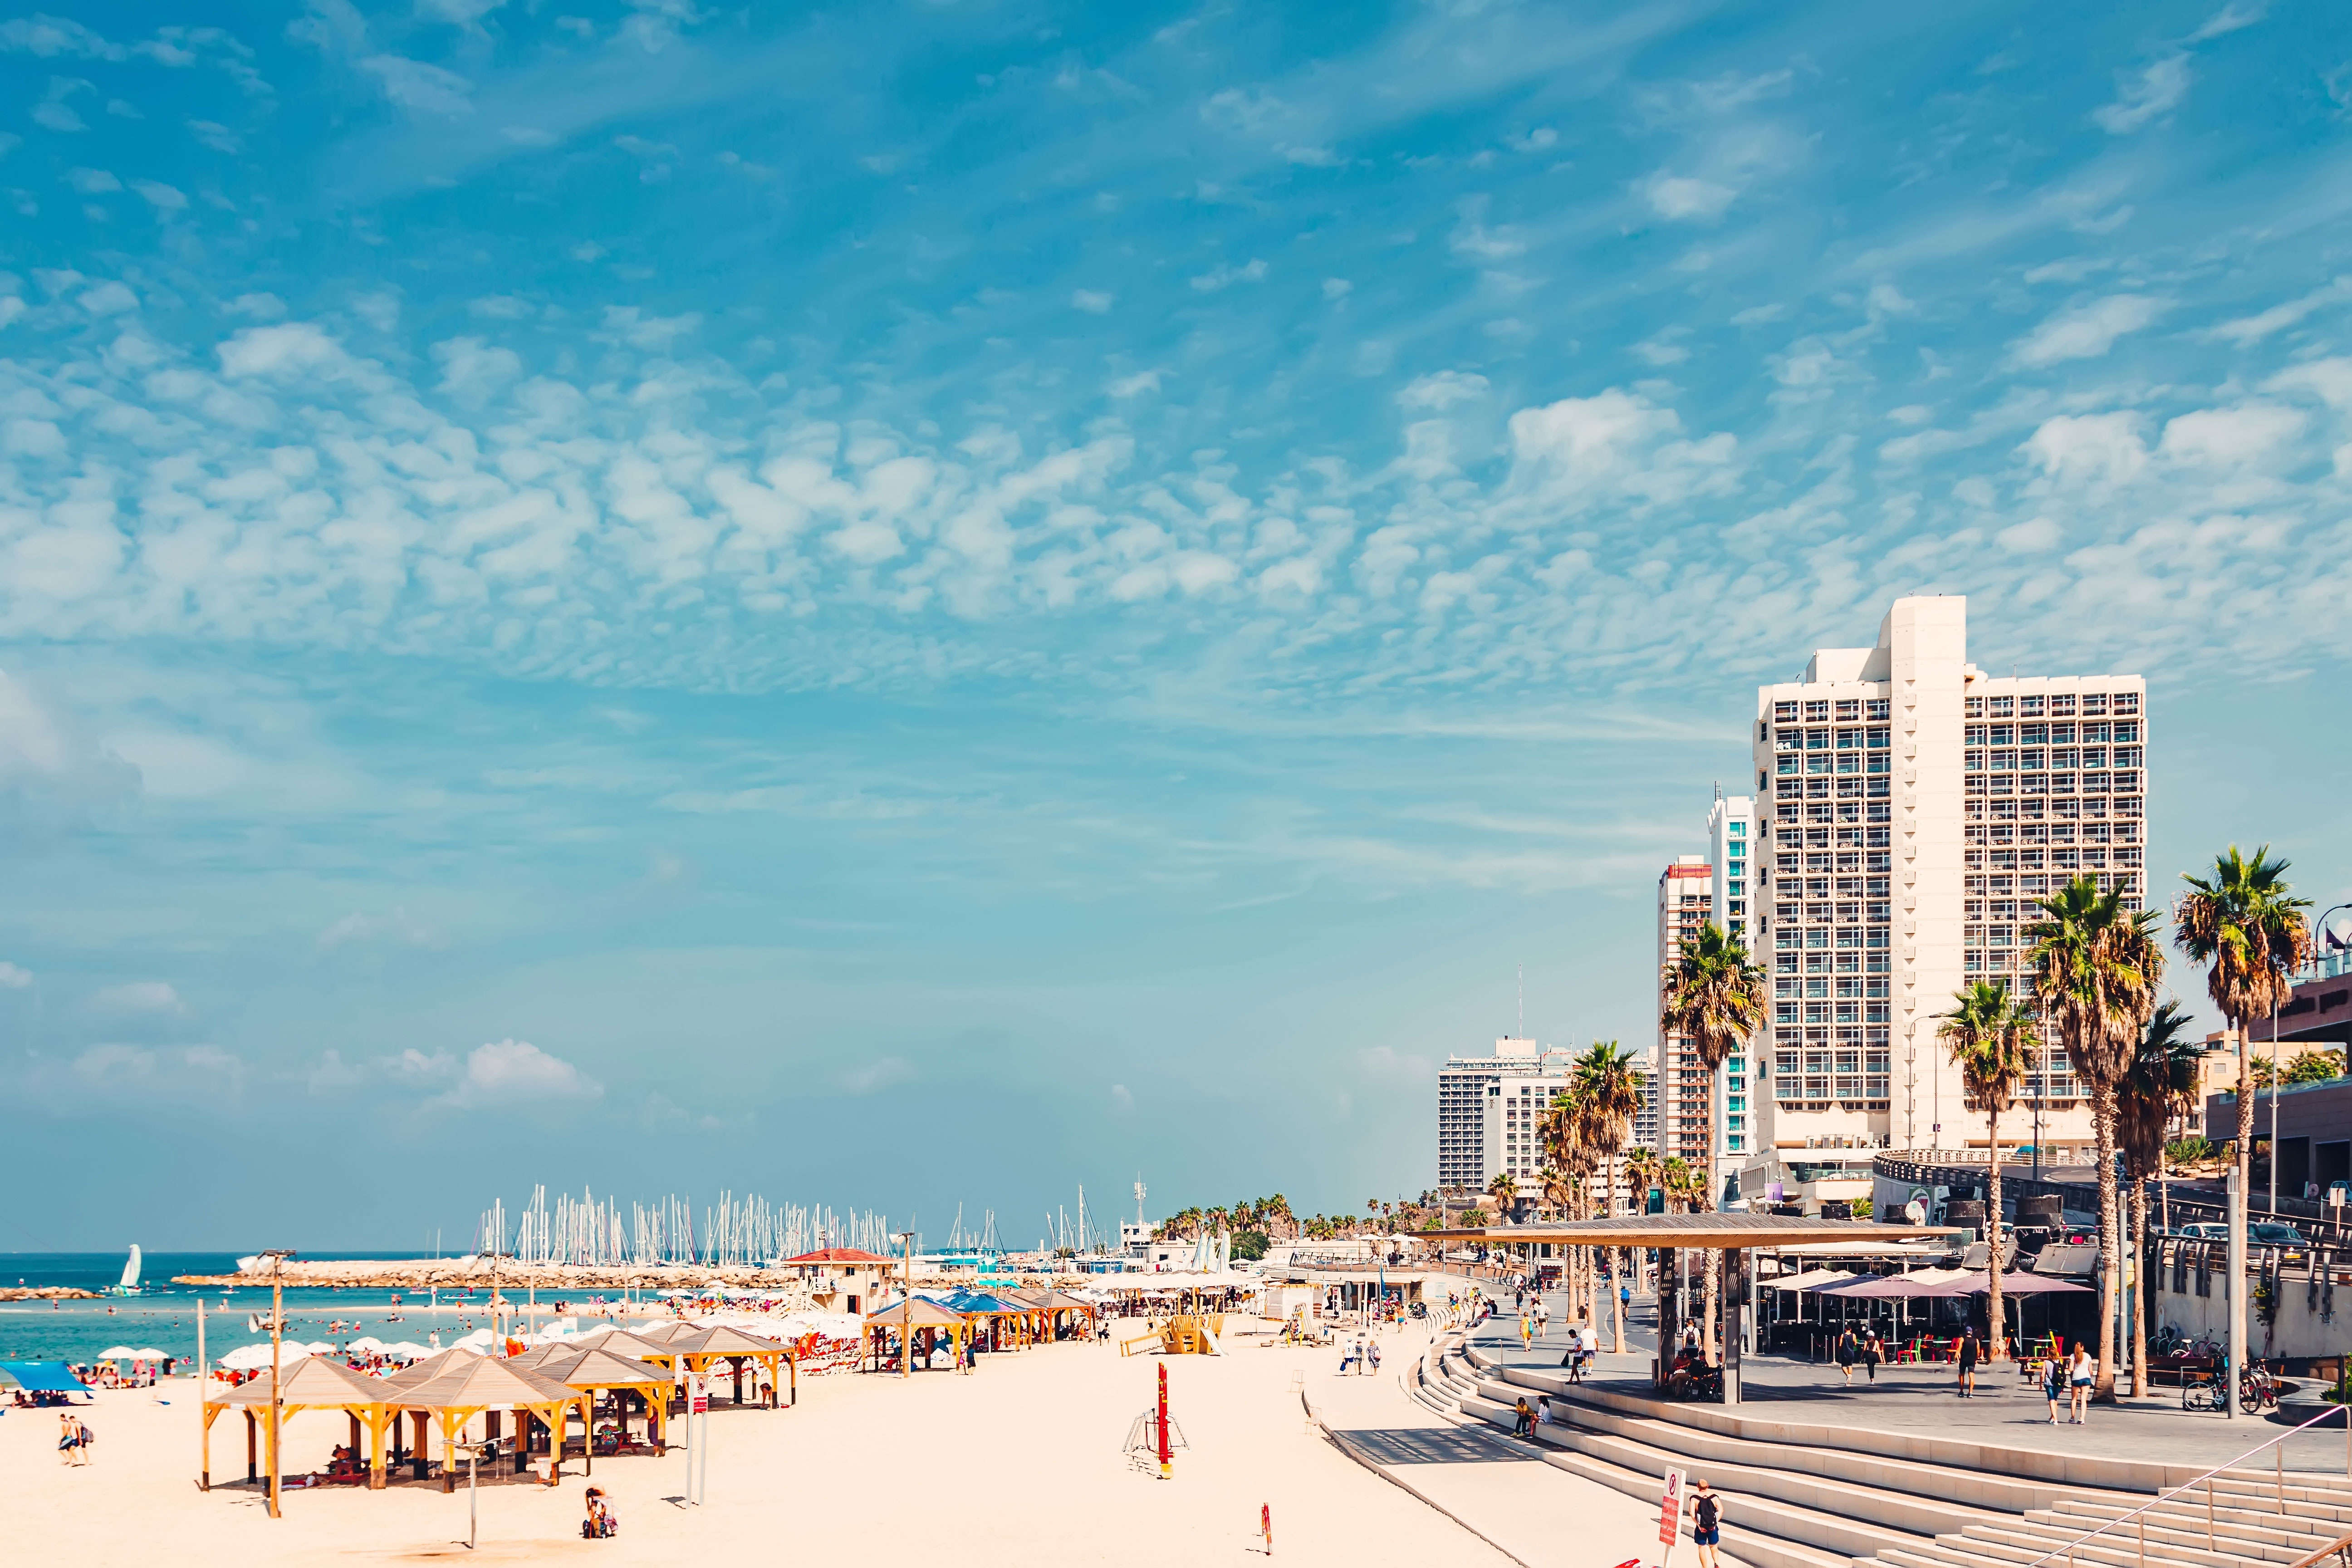 For beautiful Israeli food, café culture and great nightlife you can't beat Tel Aviv